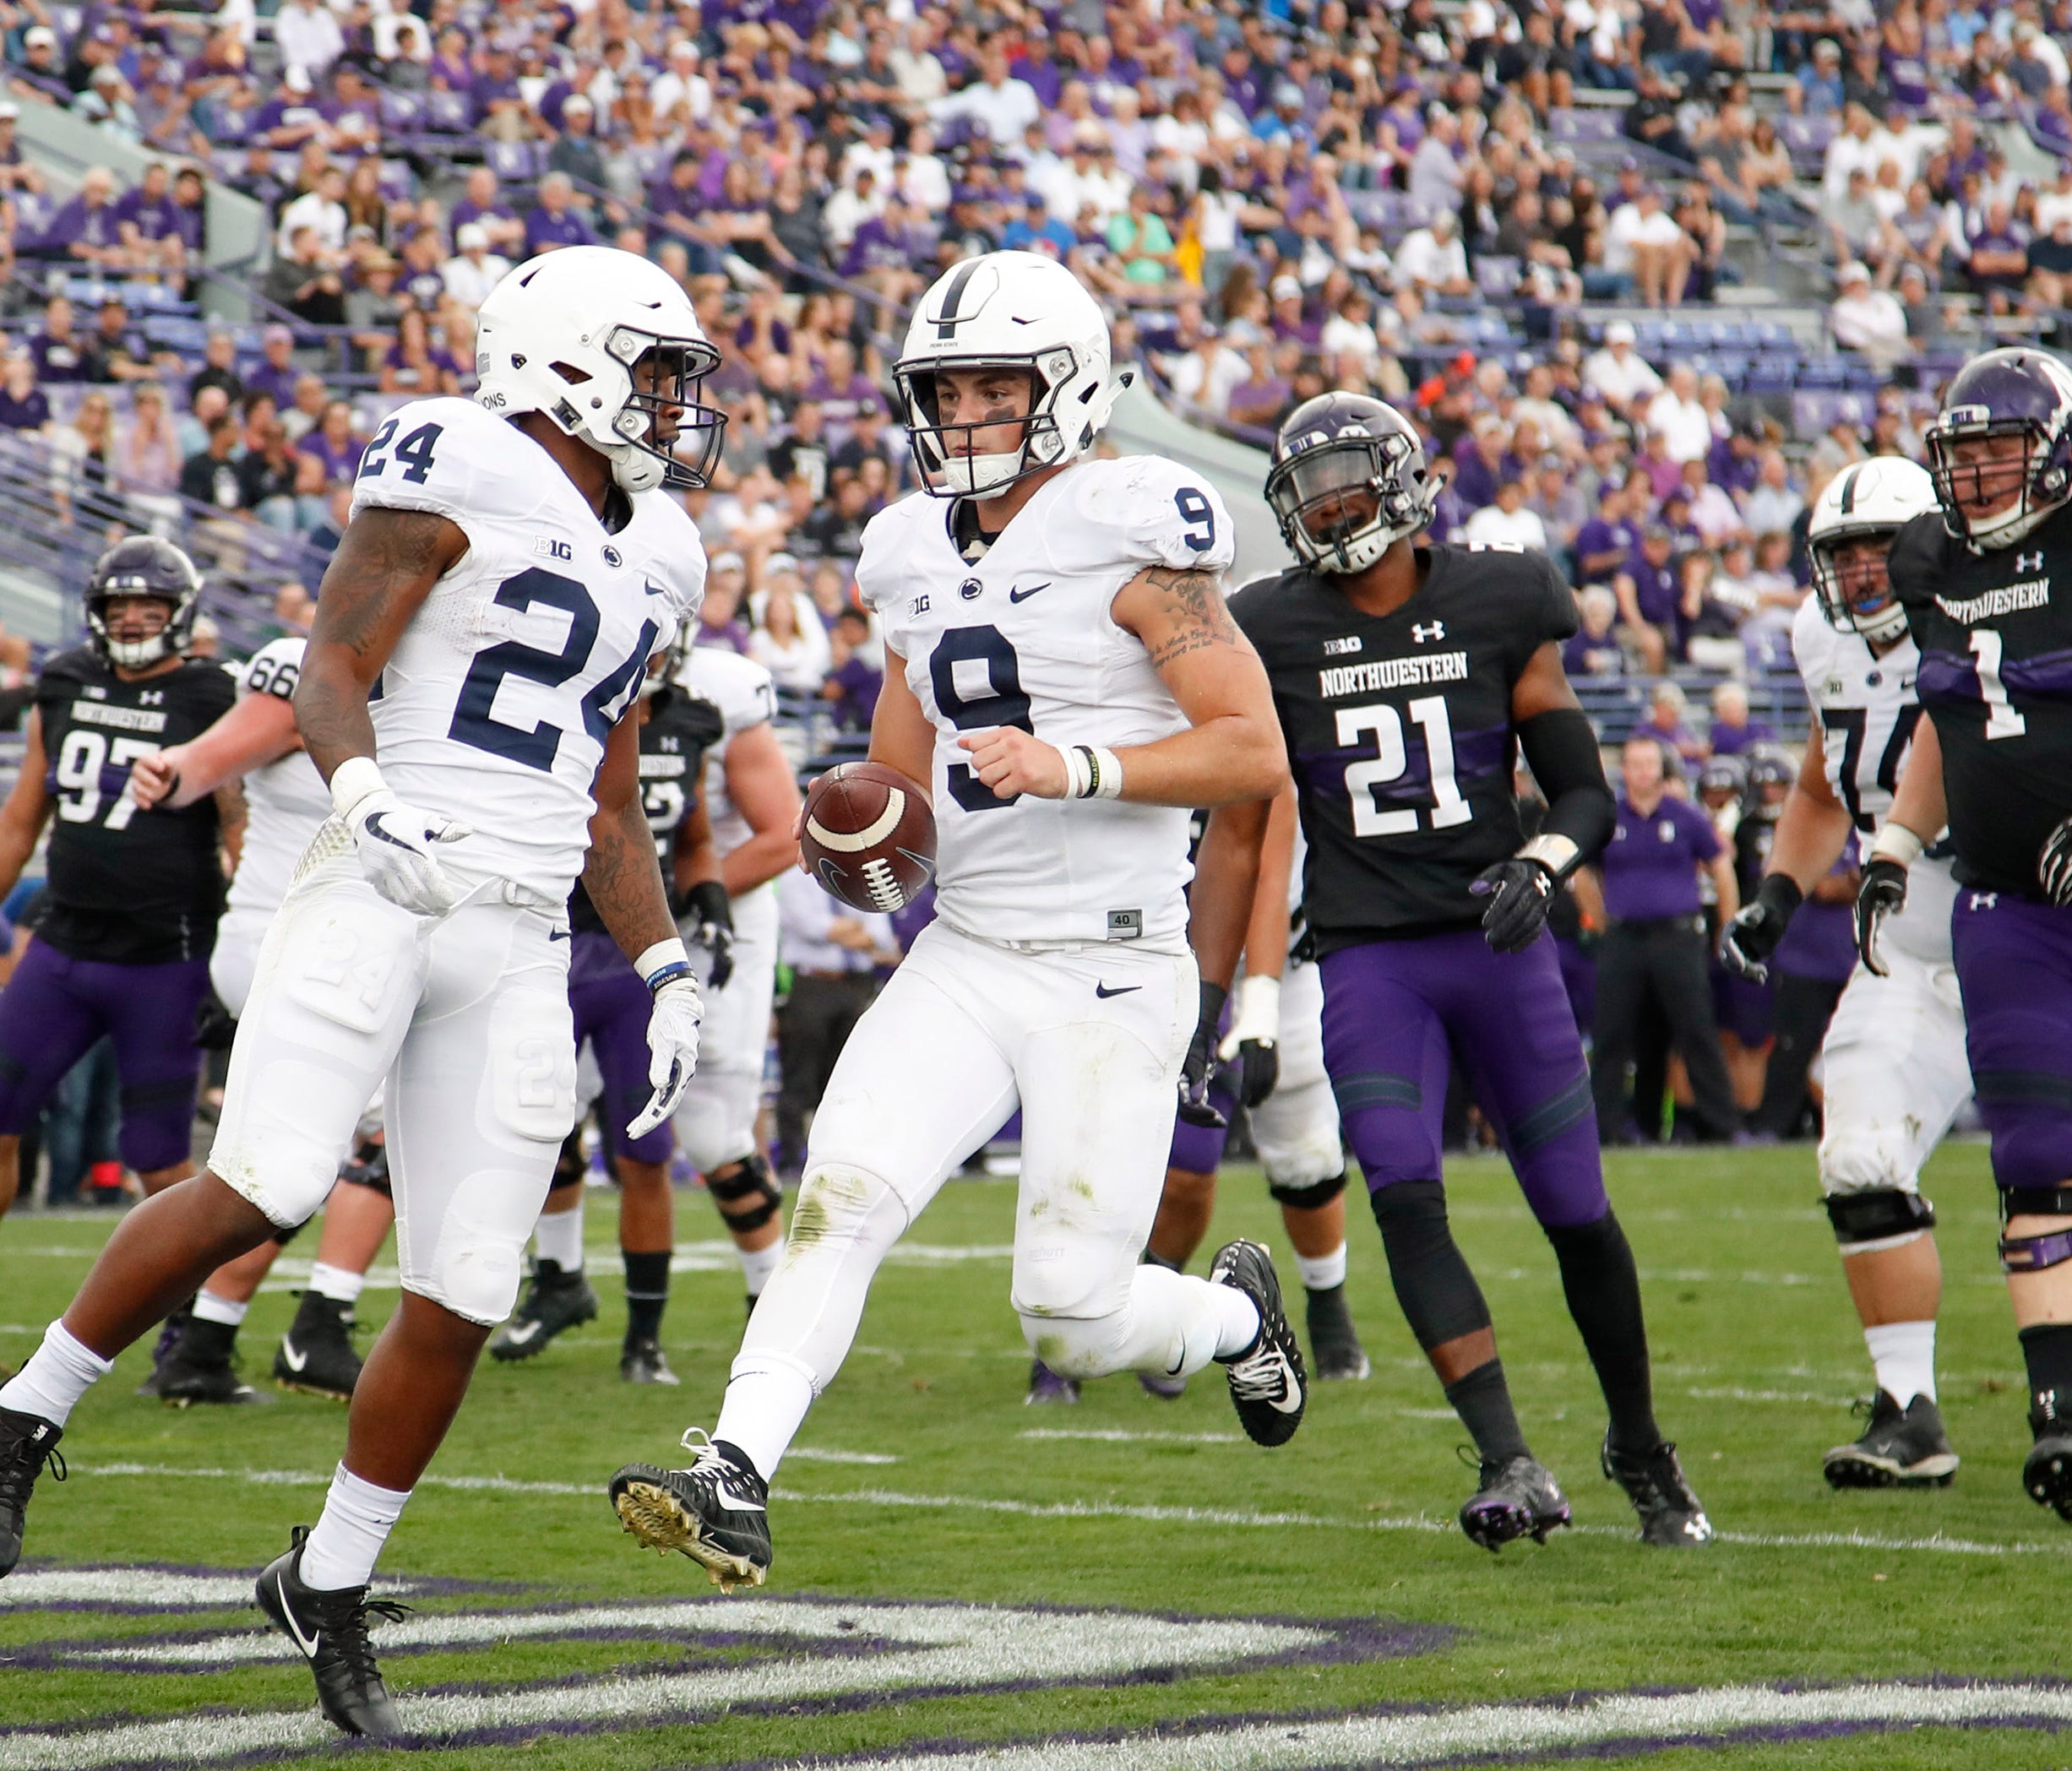 Penn State quarterback Trace McSorley scores a touchdown against Northwestern.